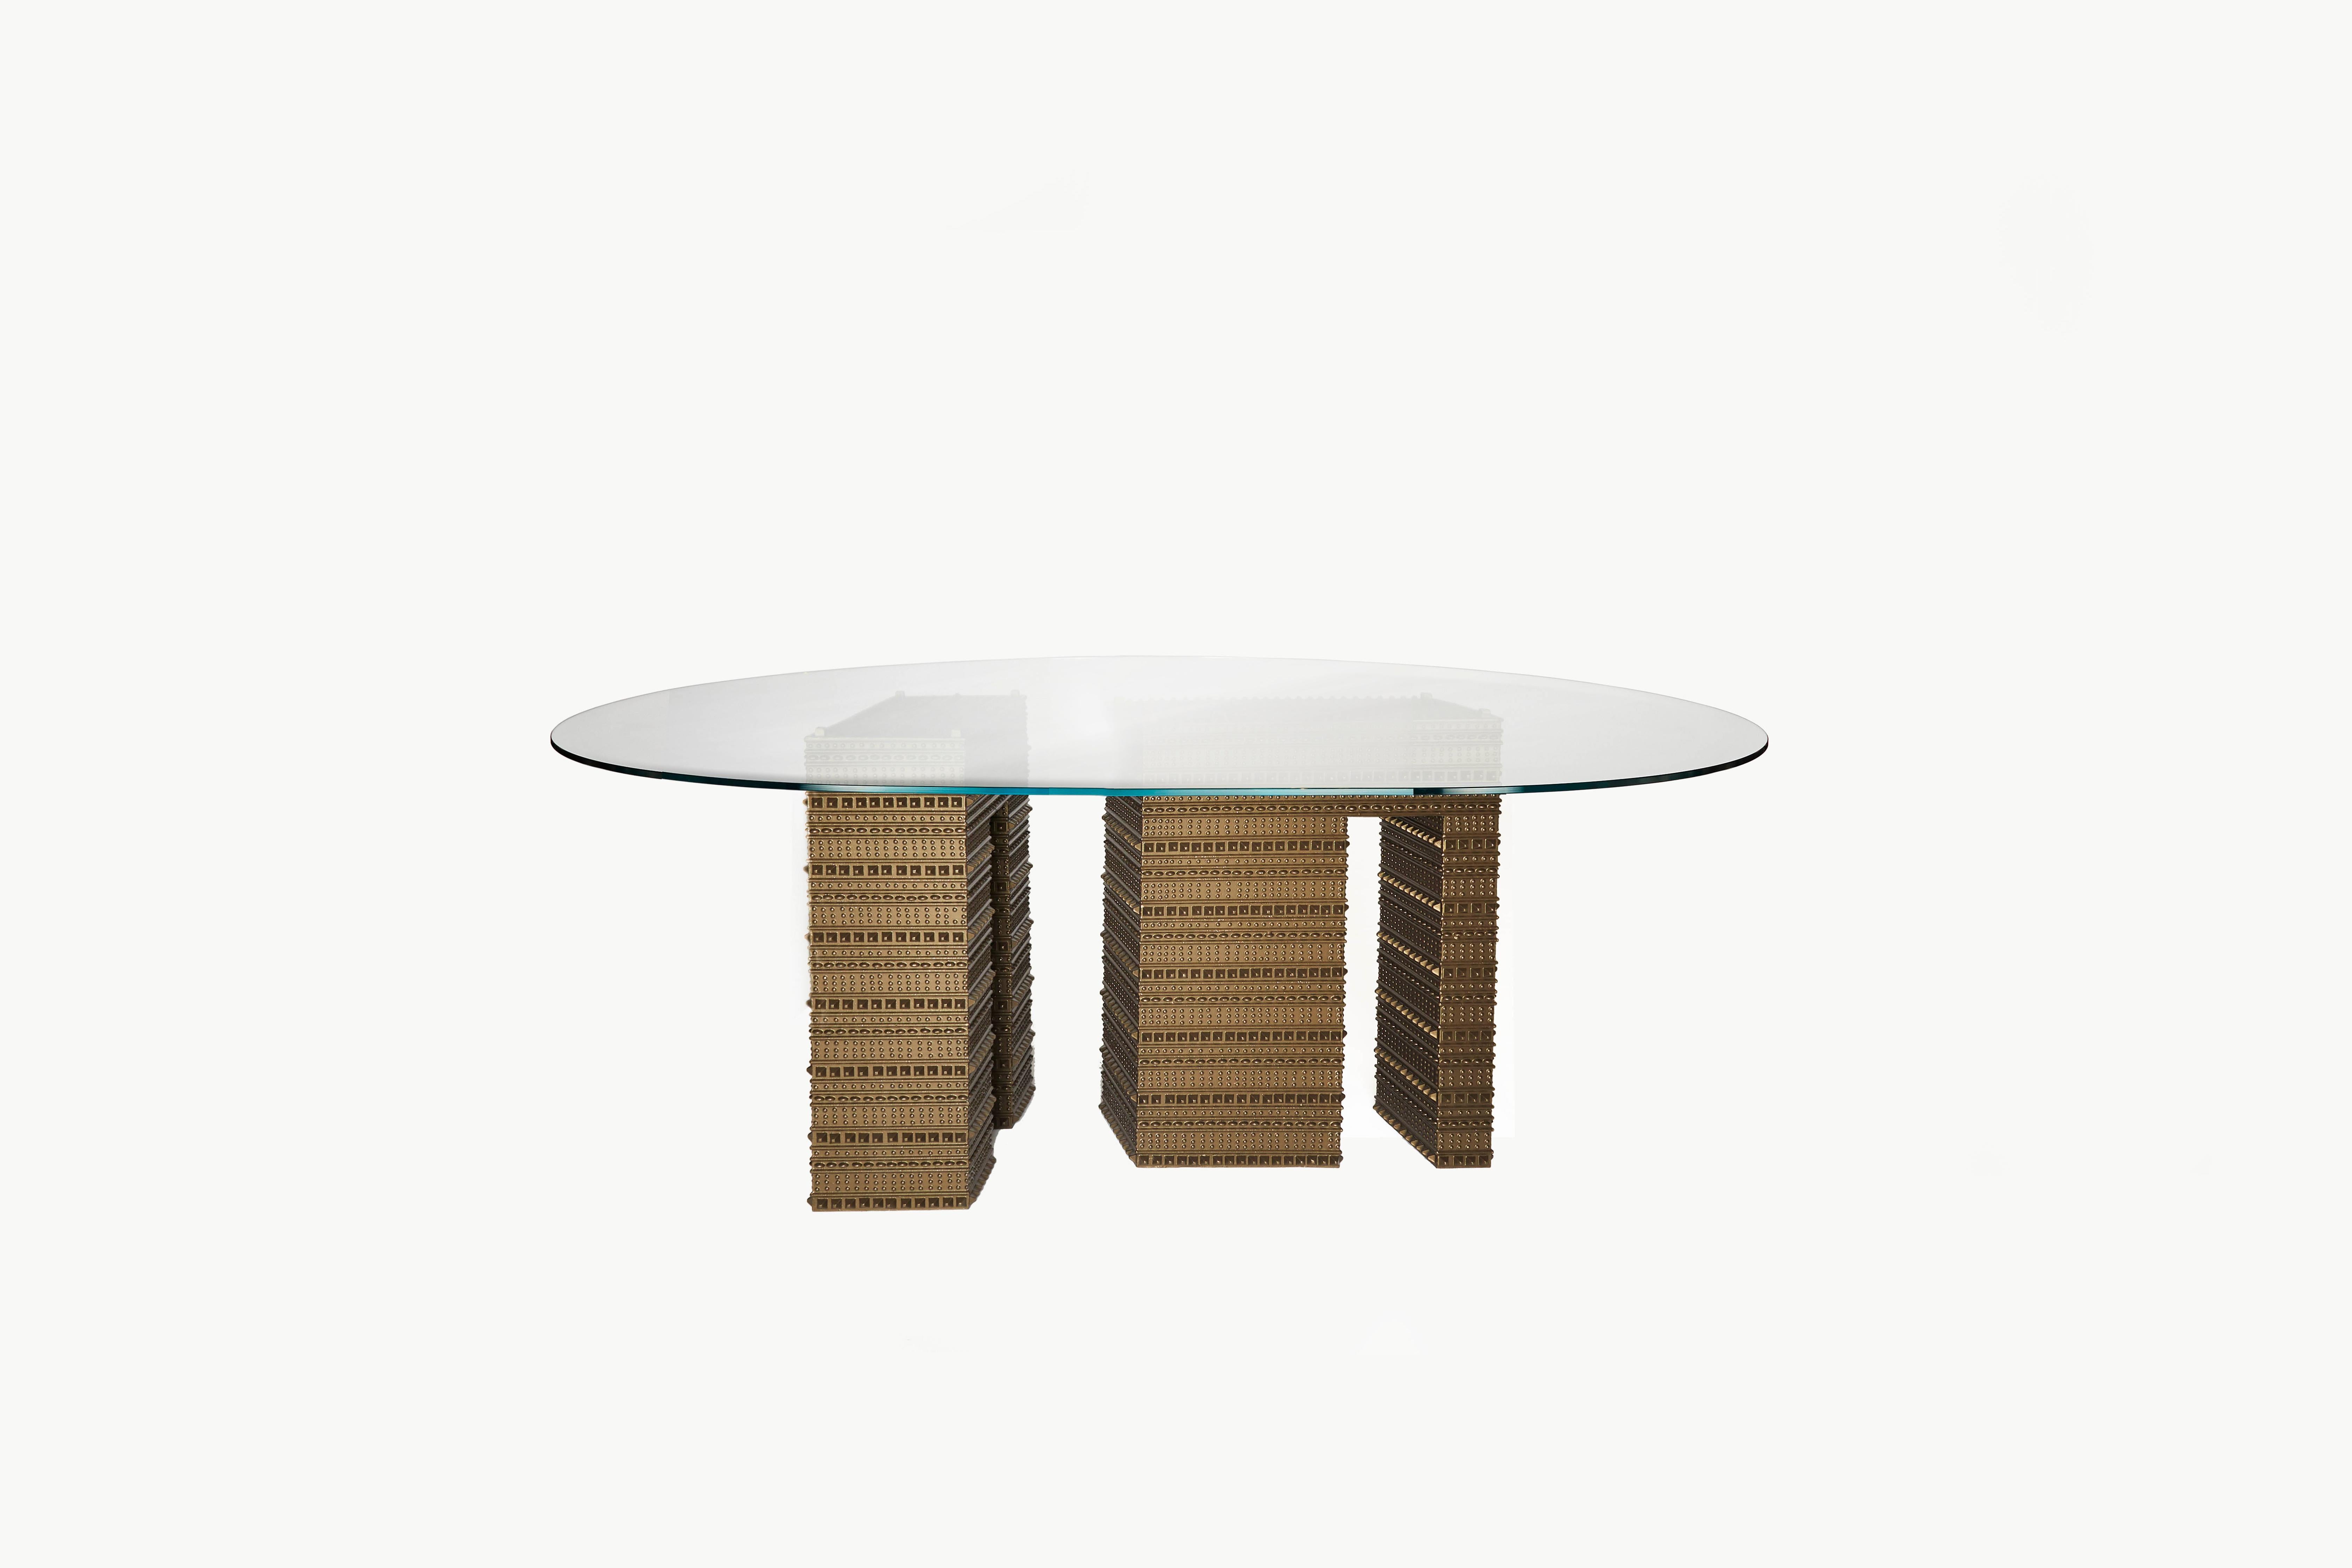 The strong geometrical Armour patterned bases support like cast bronze pillars the delicately placed squoval glass top on the Fortis Dining Table. A dining table created to encourage discussion and reflection through what is revealed below the glass